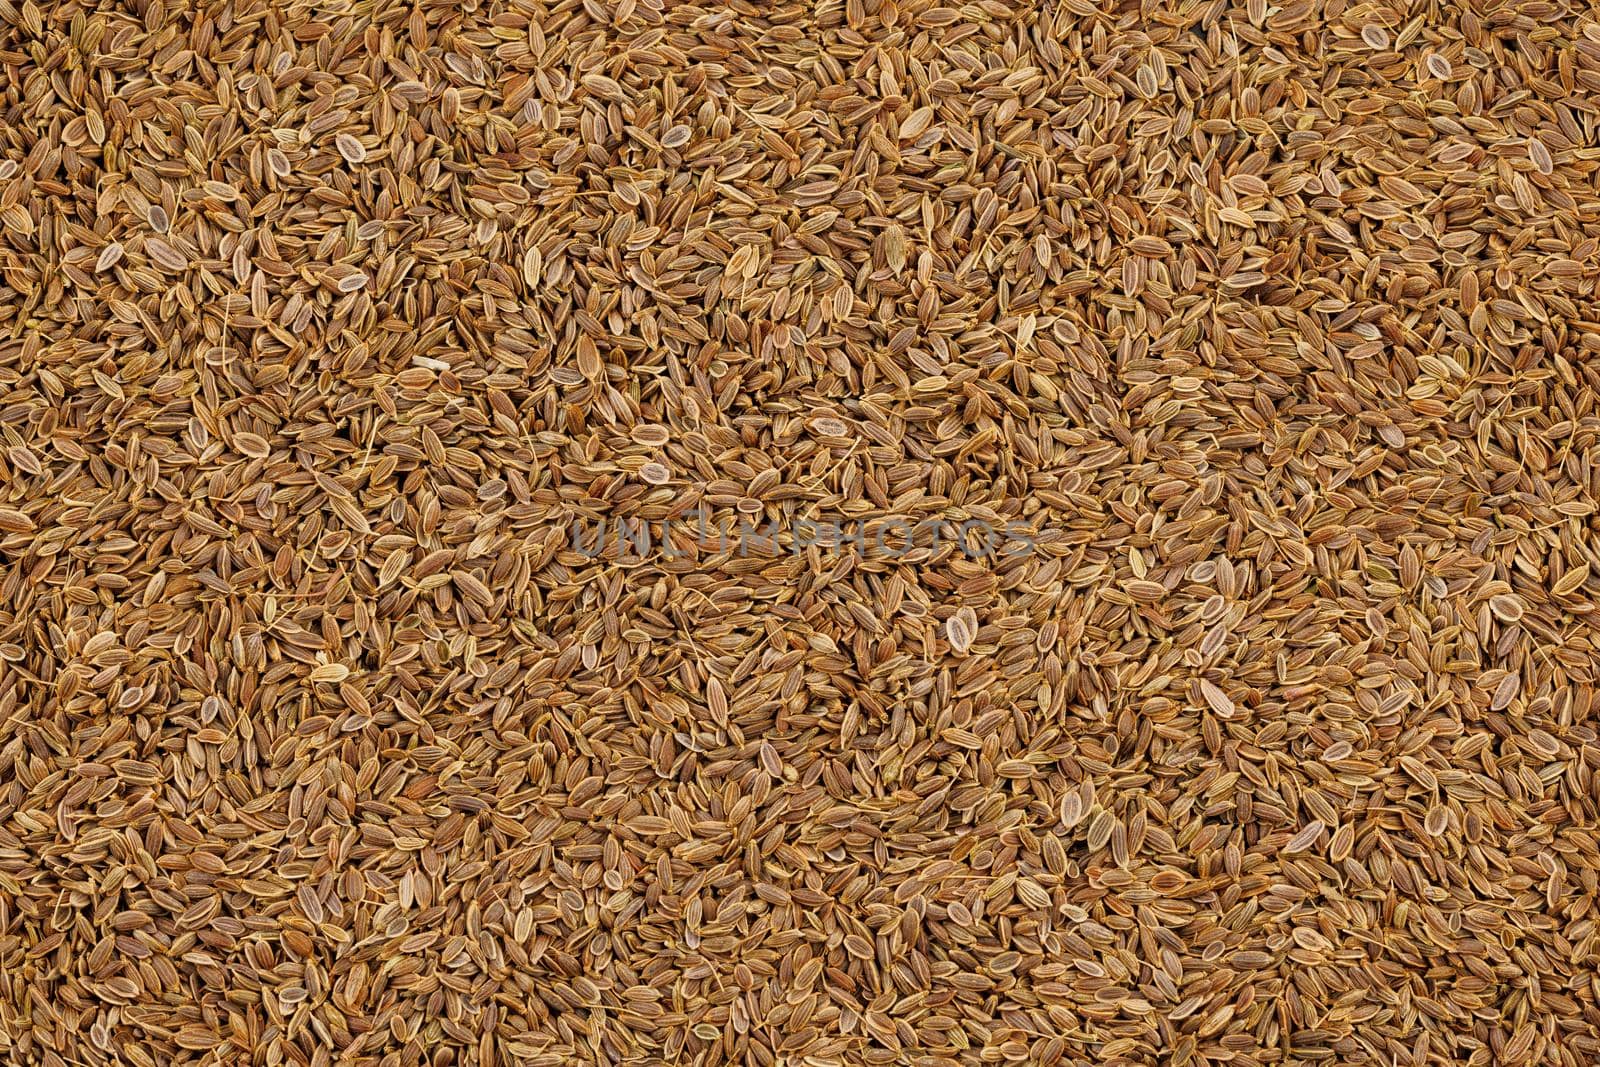 Dry Rolls Dill - Anethum graveolens - seeds on flat surface, flat texture and full-frame background. It is only species in genus Anethum. Seeds are used as herb or spice for flavouring food.